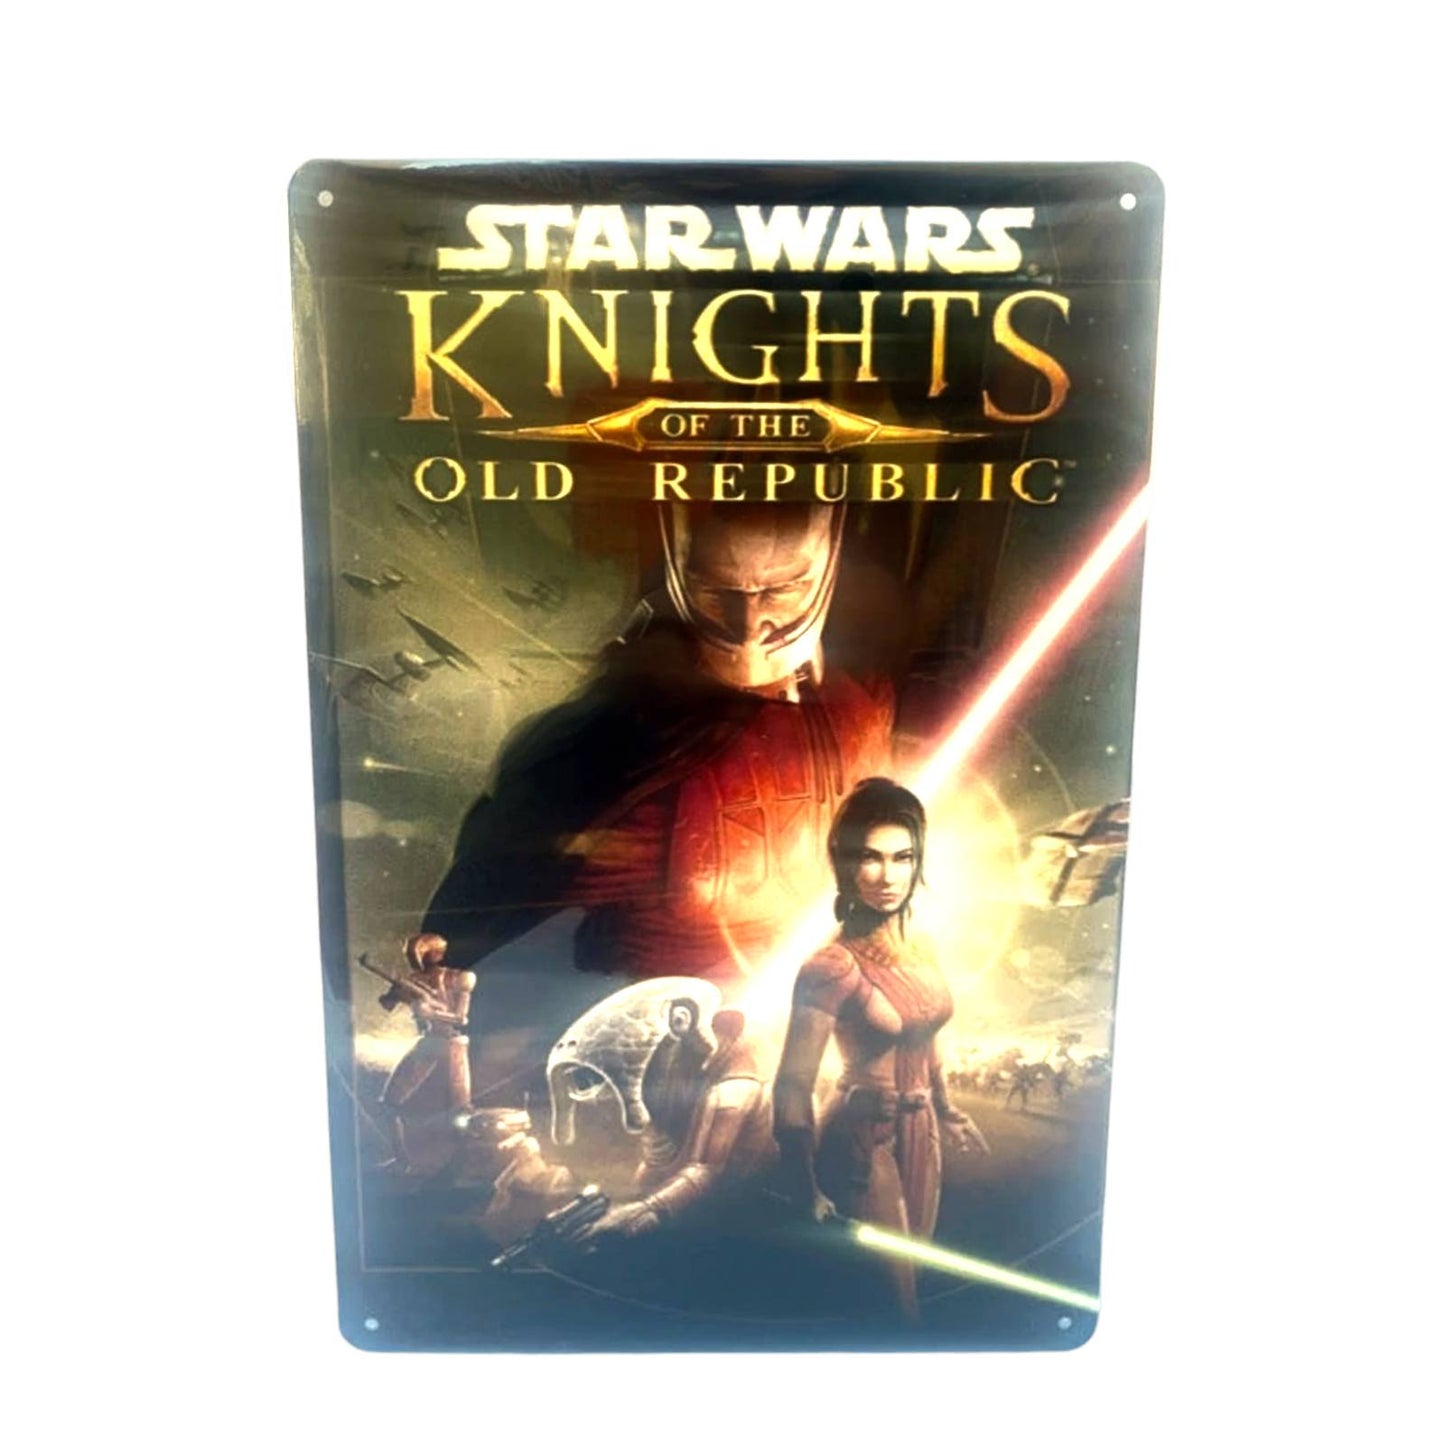 Star Wars Knights of the Old Republic Video Game Cover Metal Tin Sign 8"x12"